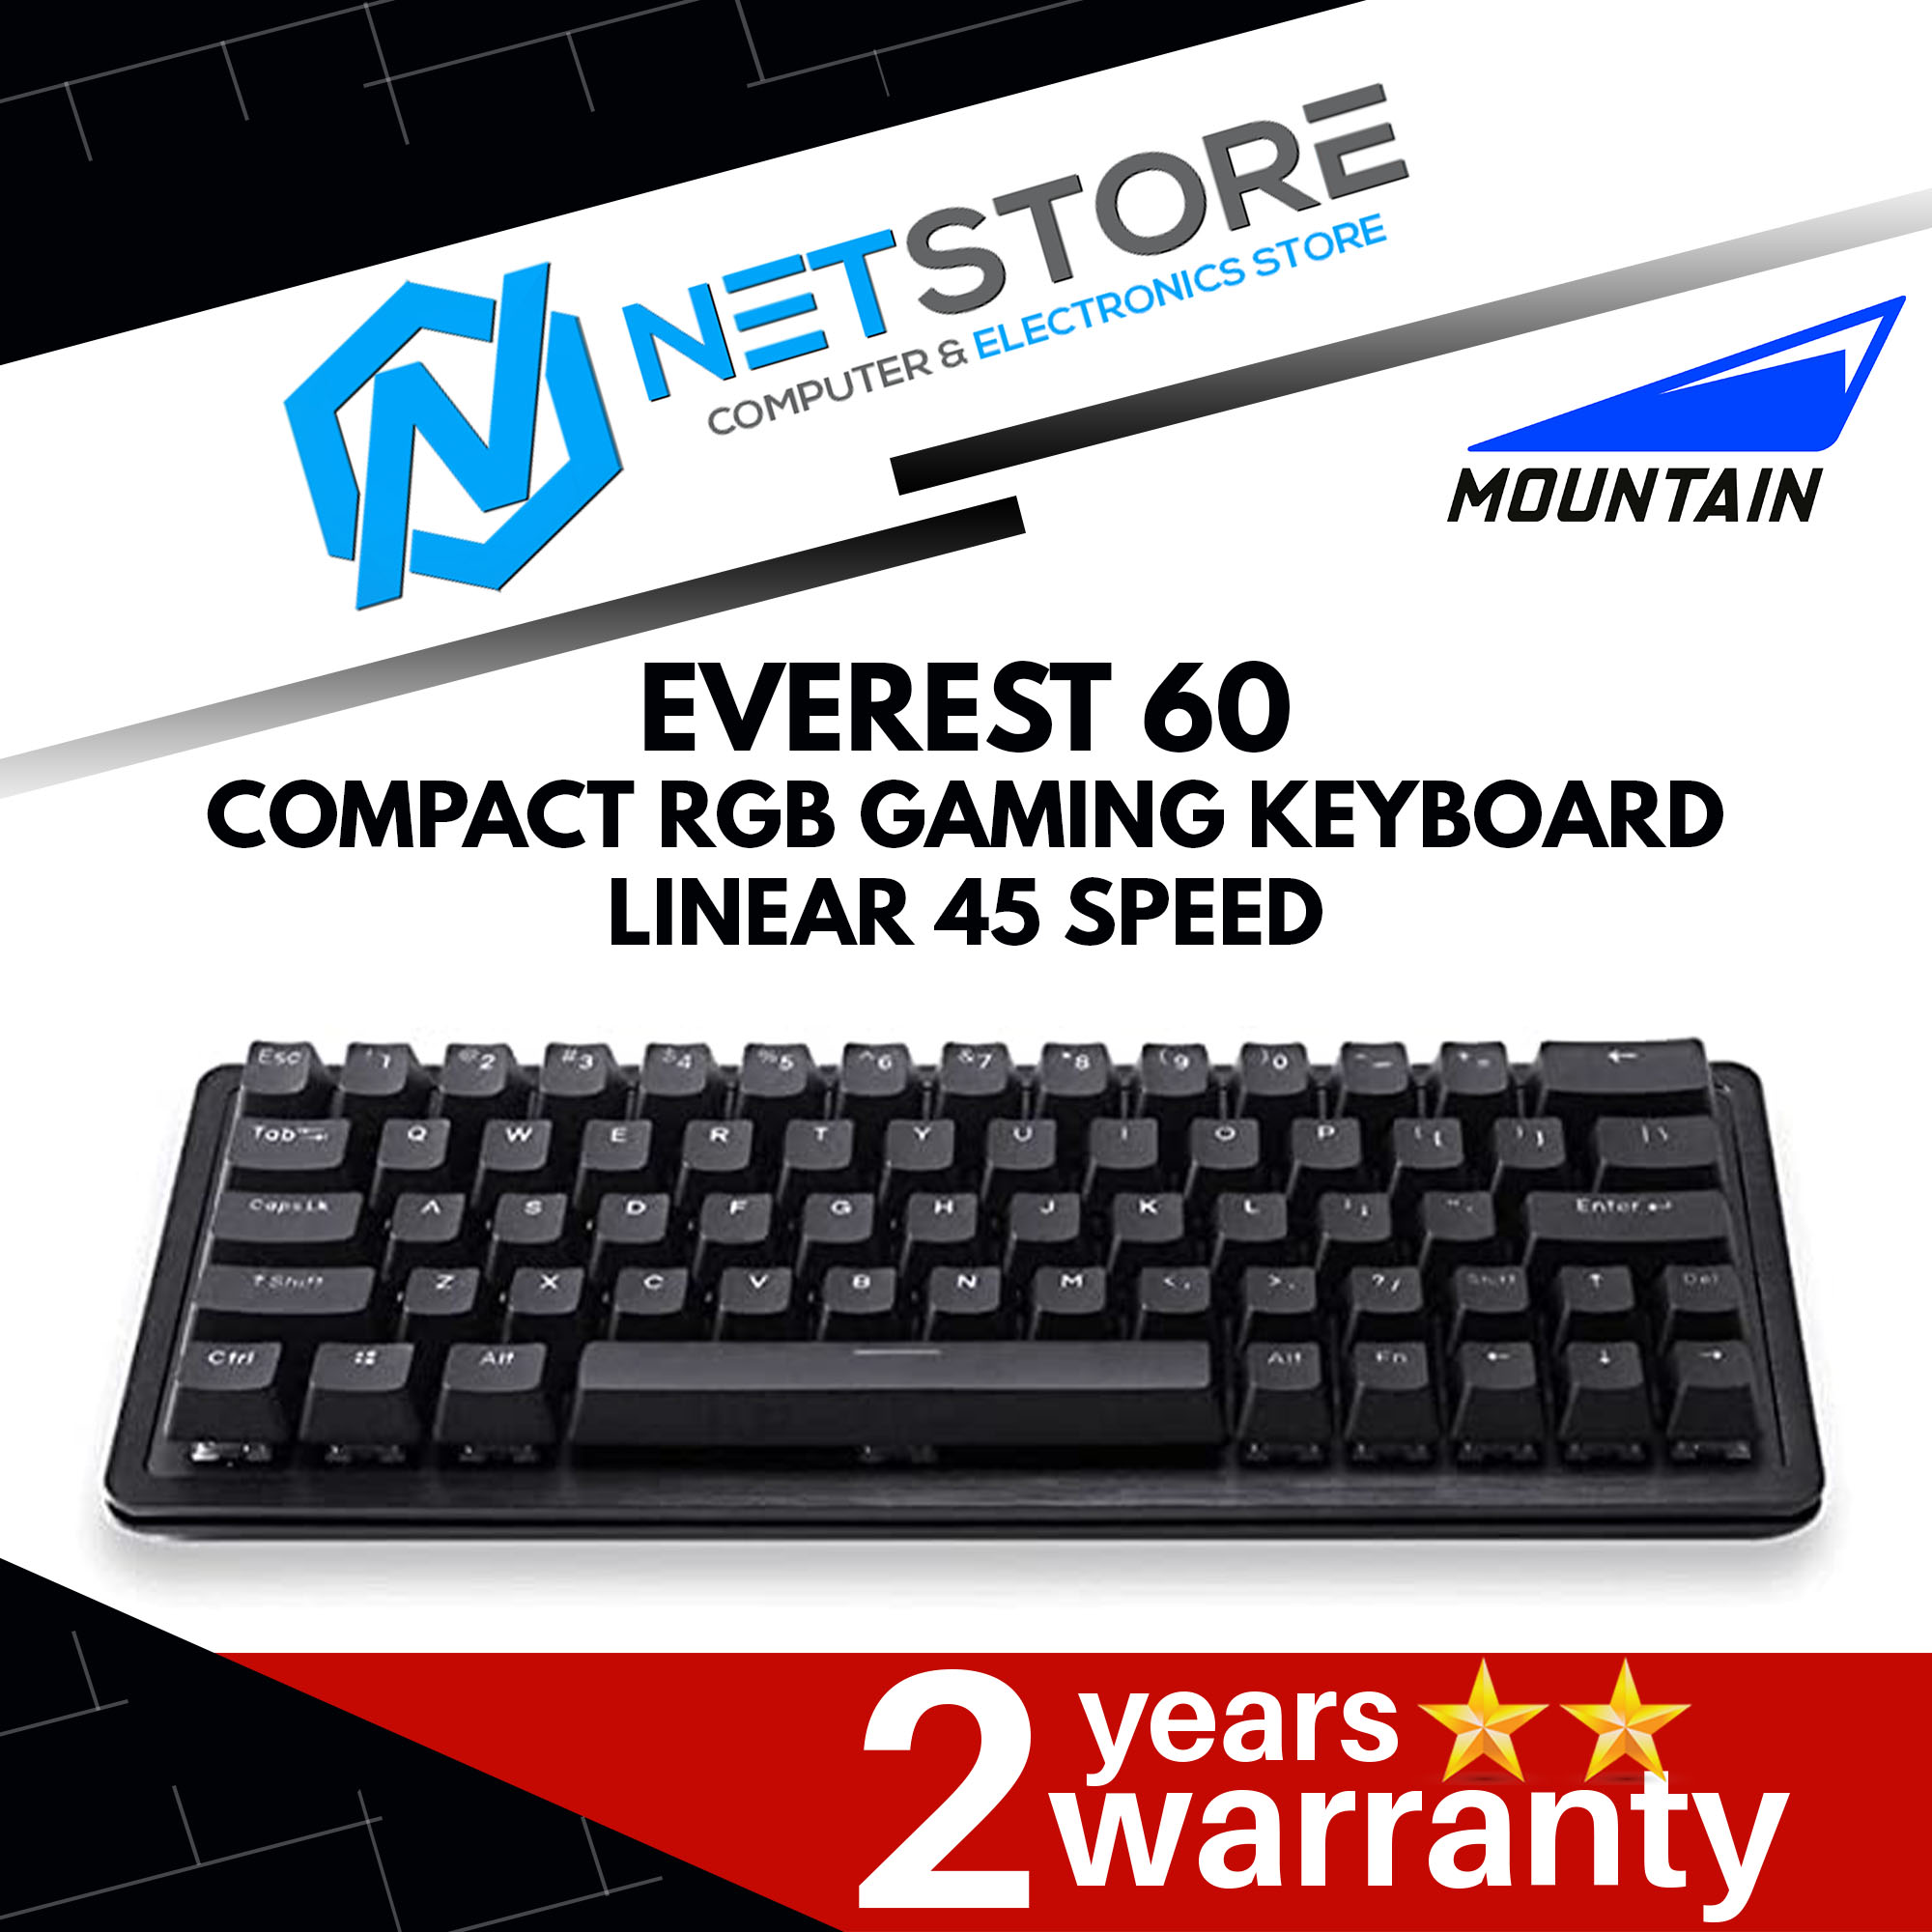 MOUNTAIN EVEREST 60 COMPACT RGB GAMING KEYBOARD LINEAR 45 SPEED SWITCH